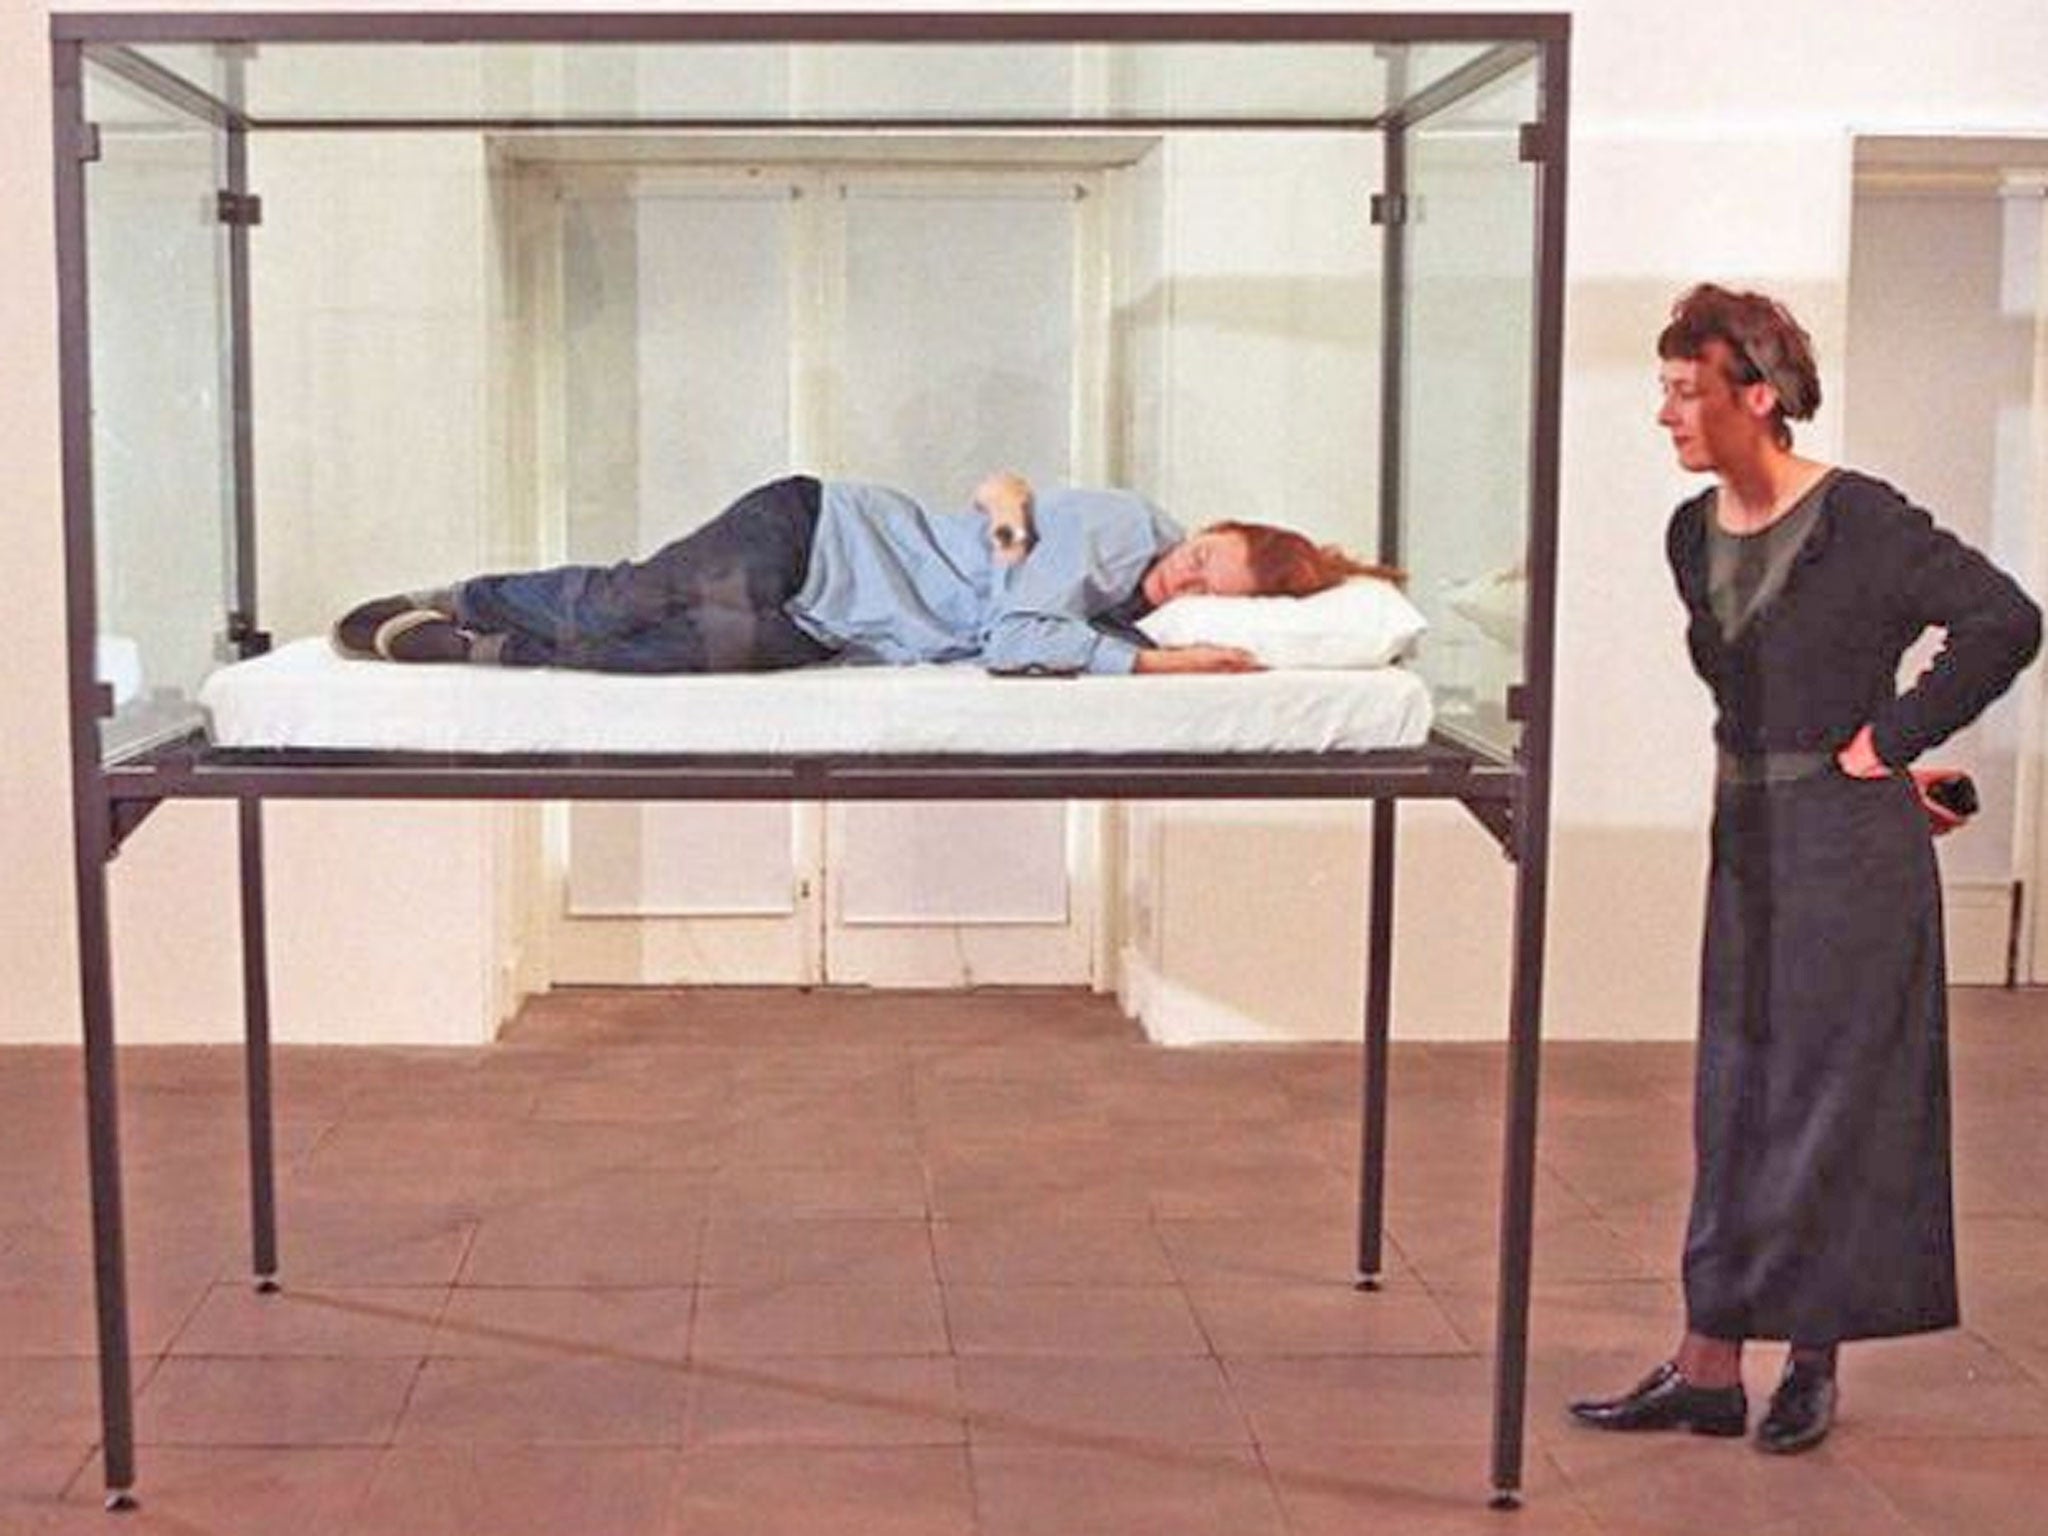 Tilda Swinton, artist and actress, sleeps in a glass box as part of an exhibition called "The Maybe" at the Serpentine Gallery in 1995